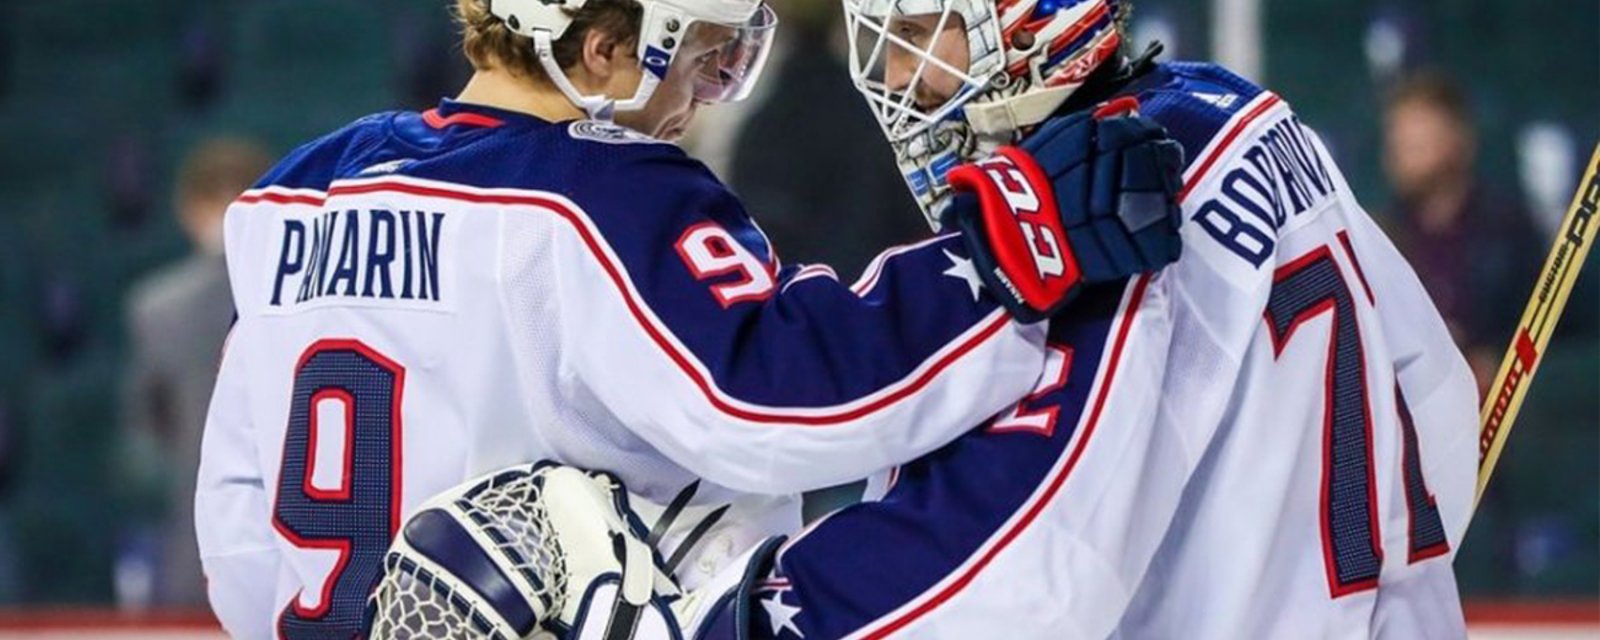 Panarin and Bobrovsky UFA package deal off the table?